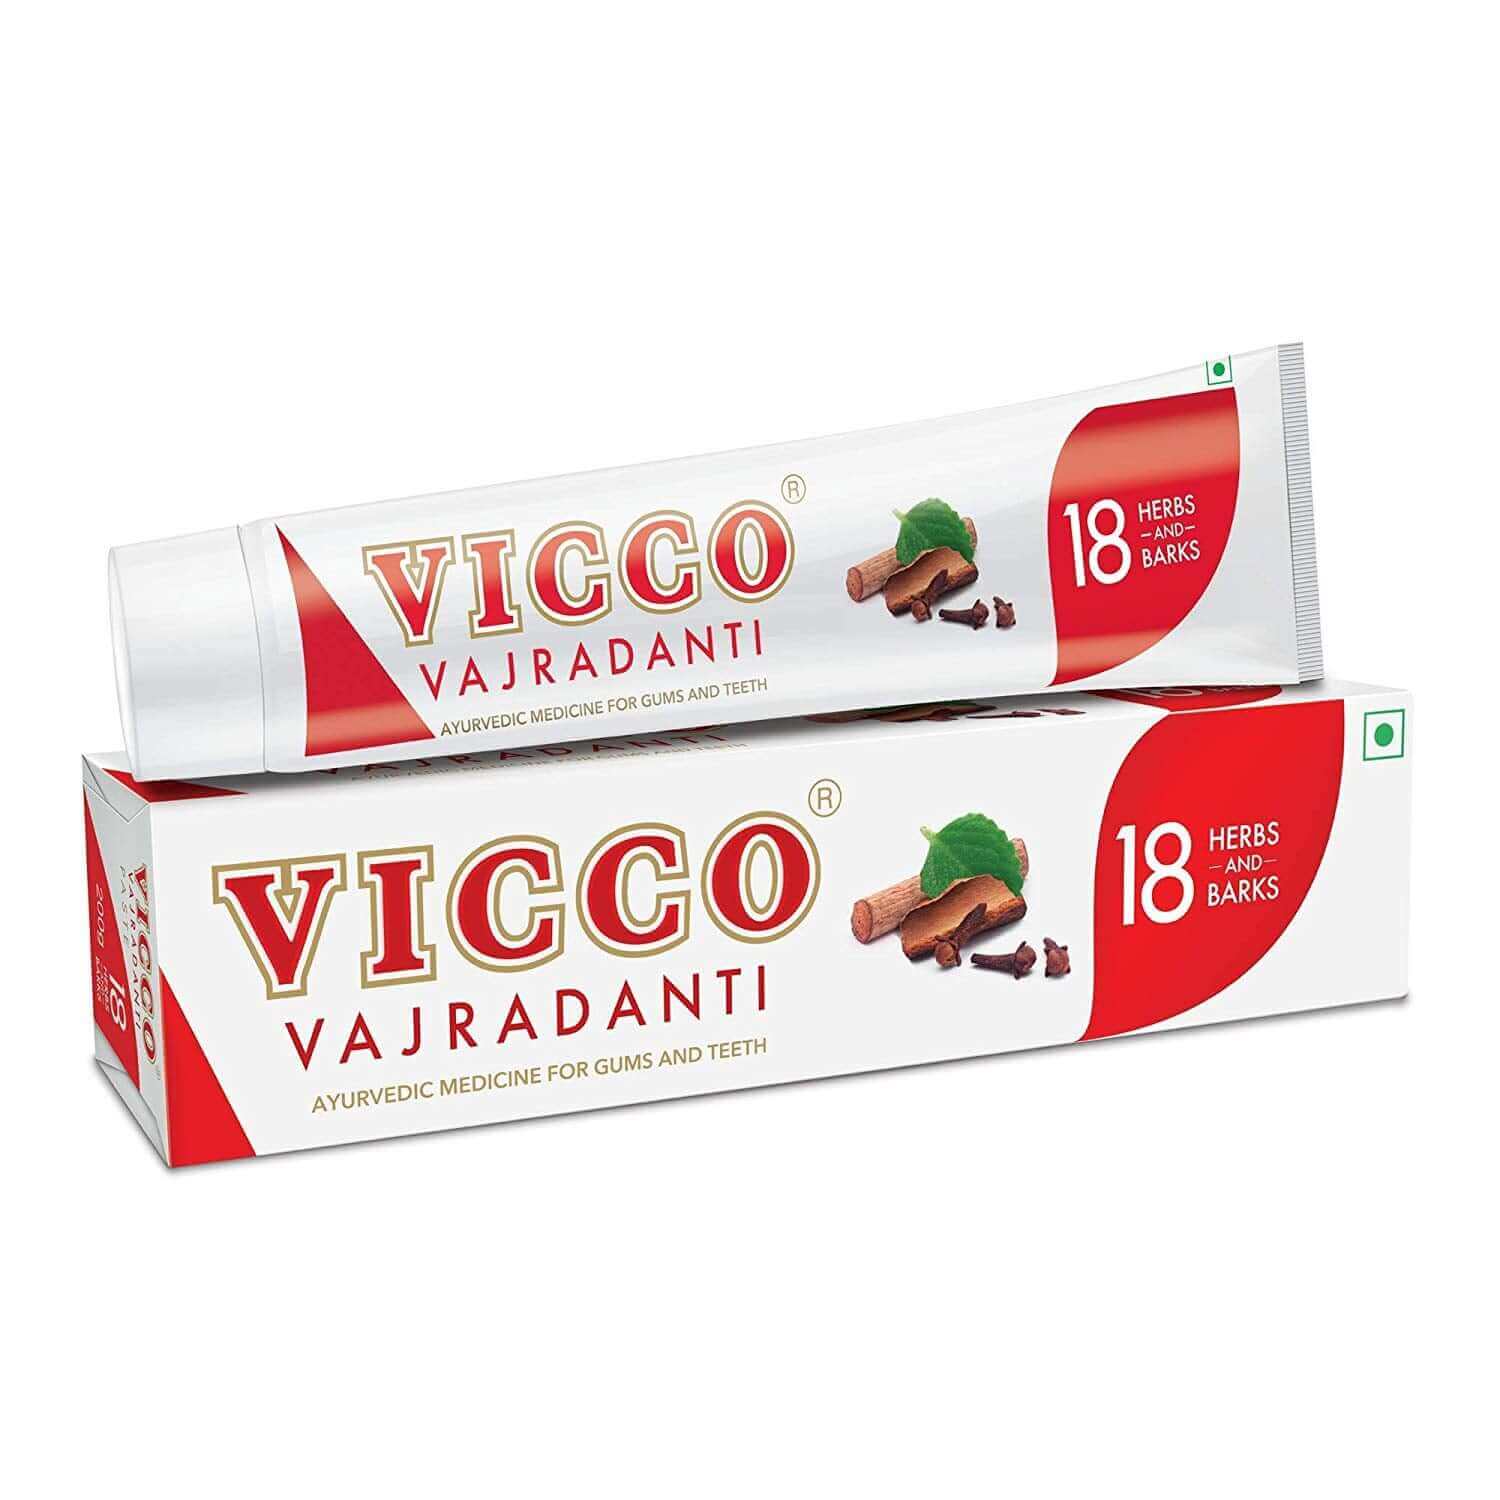 vicoo ayurvedic toothpase, medicine for gums and teeth